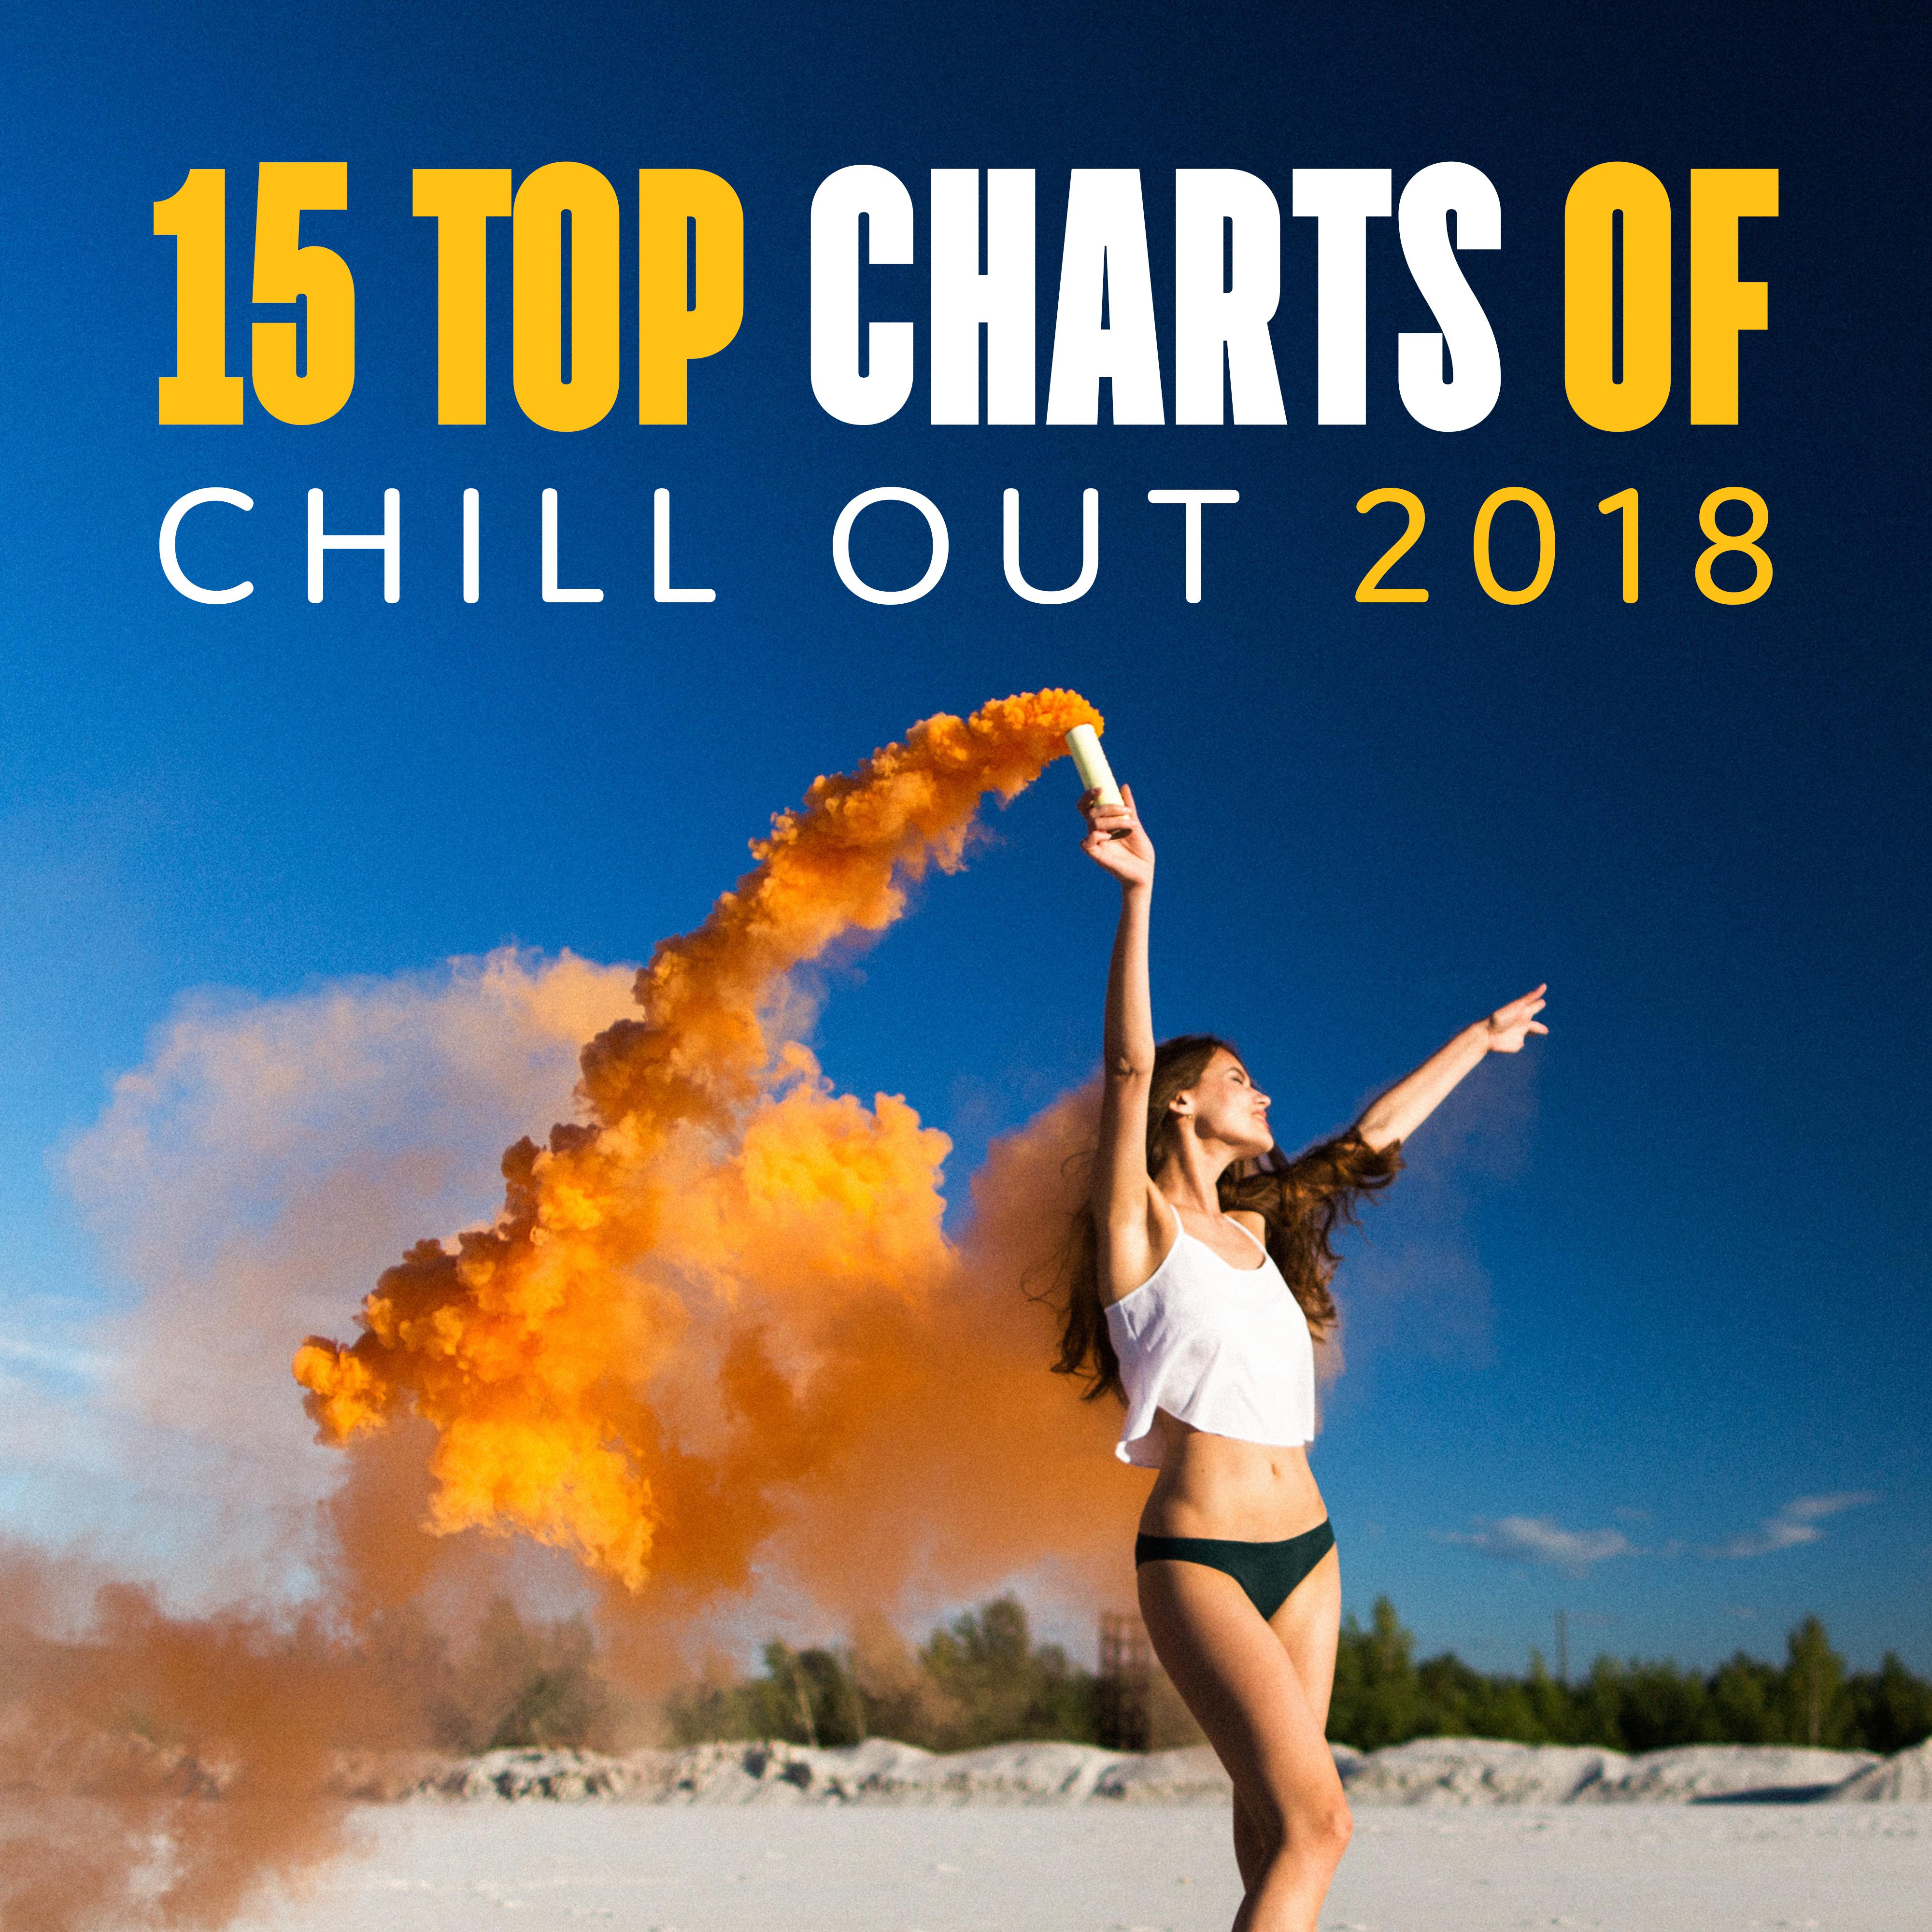 15 Top Charts of Chill Out 2018